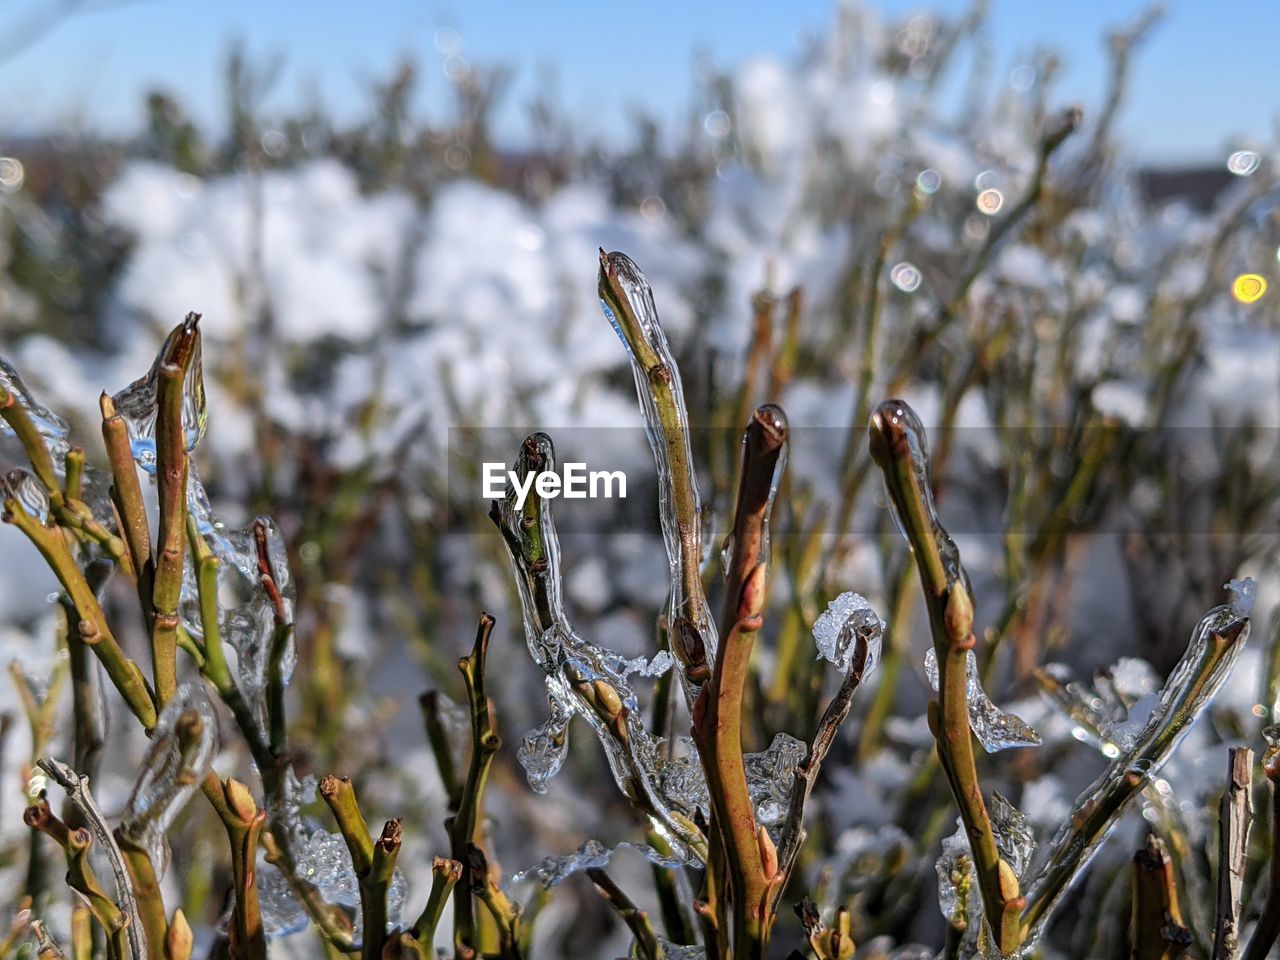 CLOSE-UP OF FROZEN PLANTS DURING WINTER